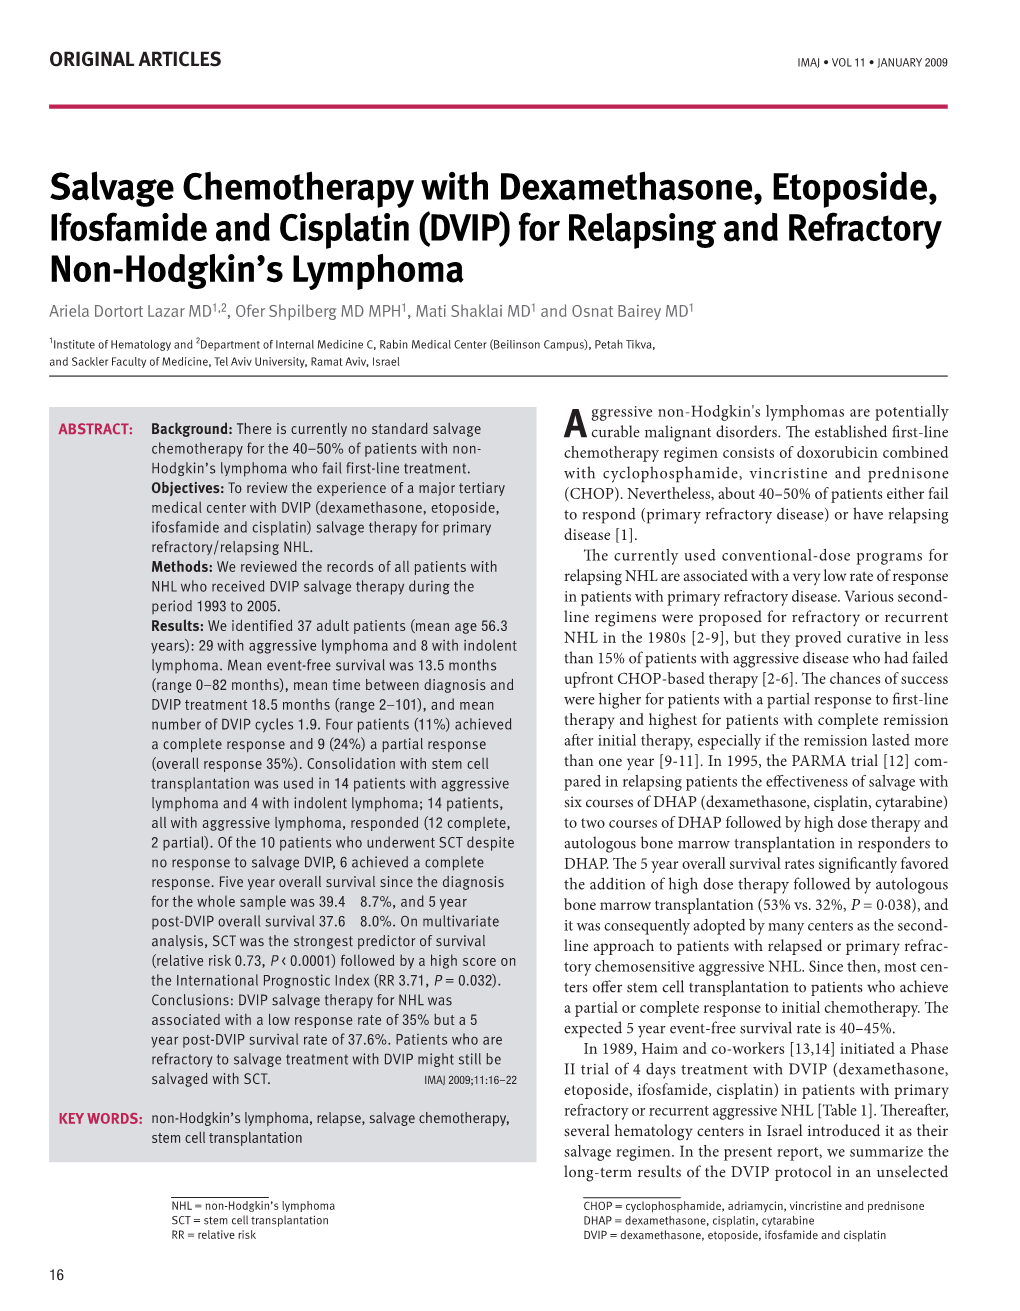 Salvage Chemotherapy with Dexamethasone, Etoposide, Ifosfamide and Cisplatin (Dvip) for Relapsing and Refractory Non-Hodgkin's